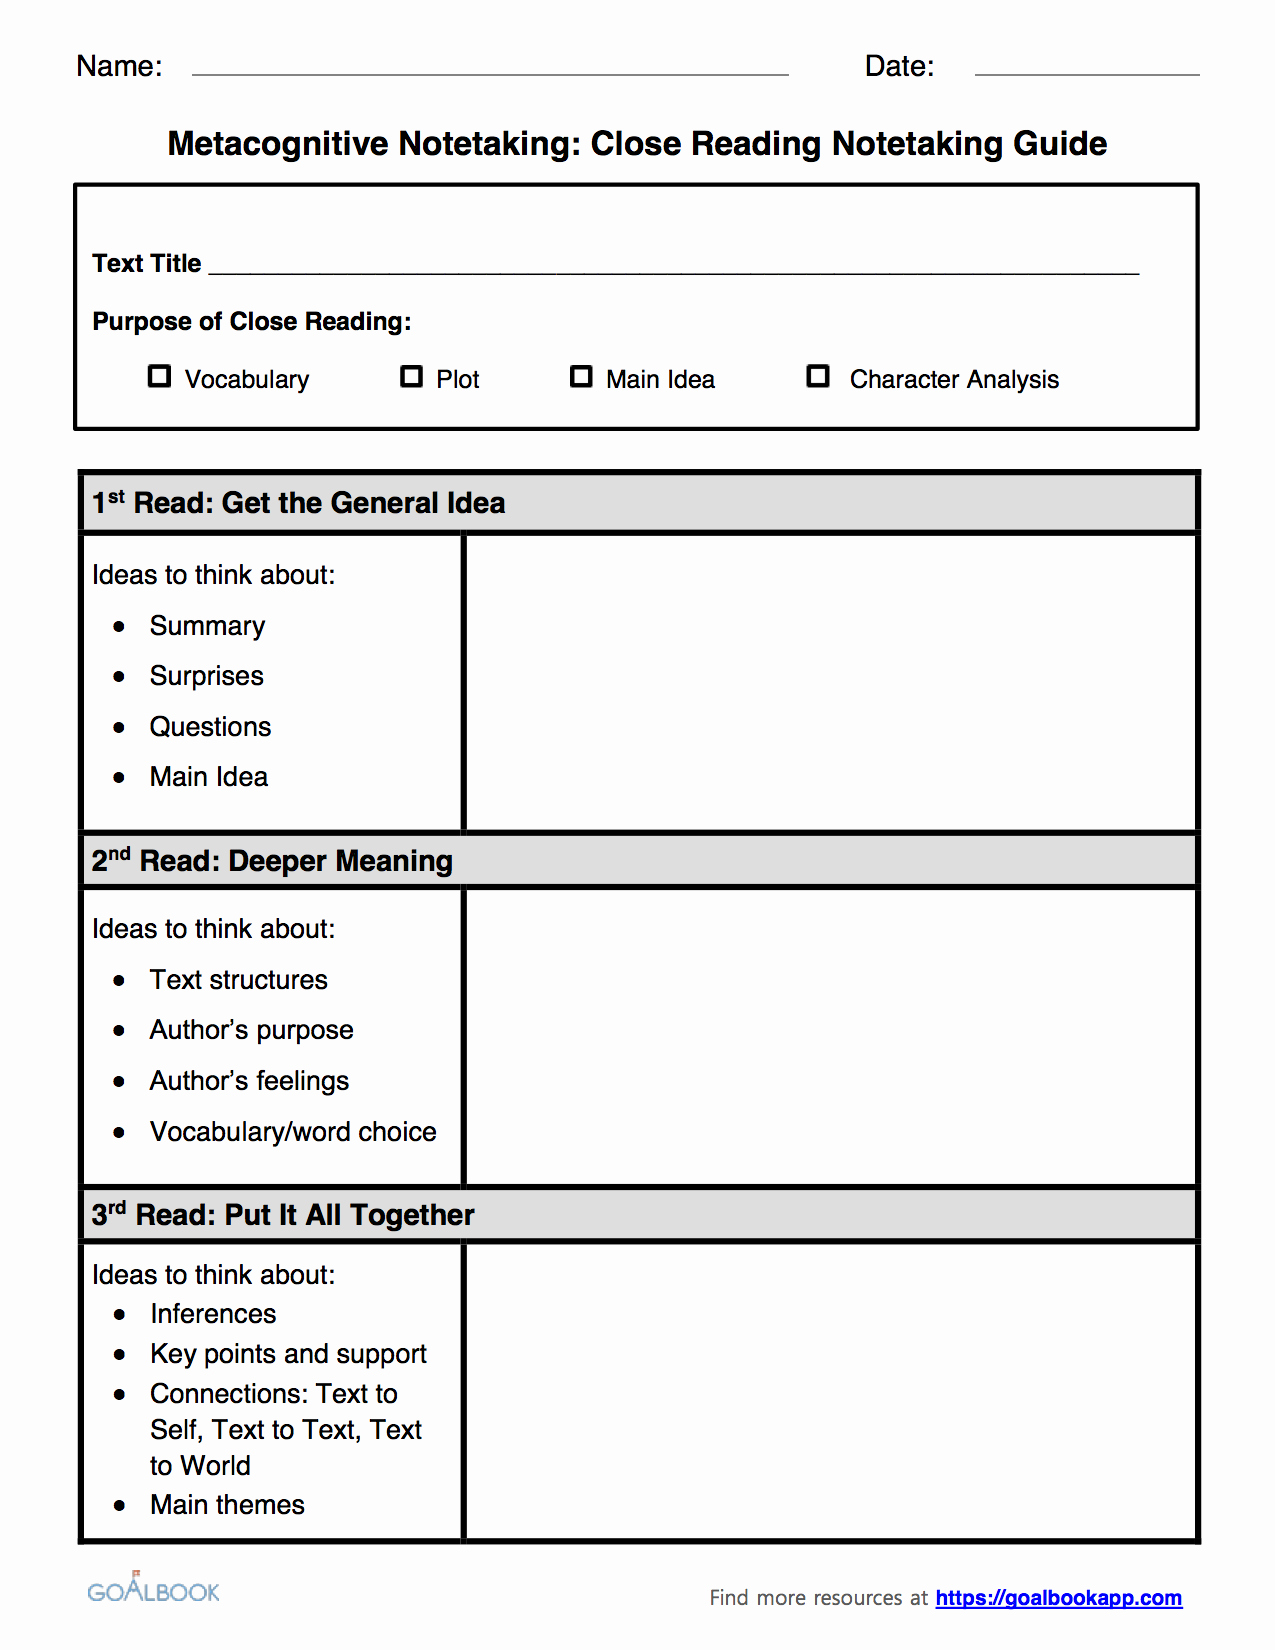 Note Taking Template Pdf Luxury Metacognitive Note Taking